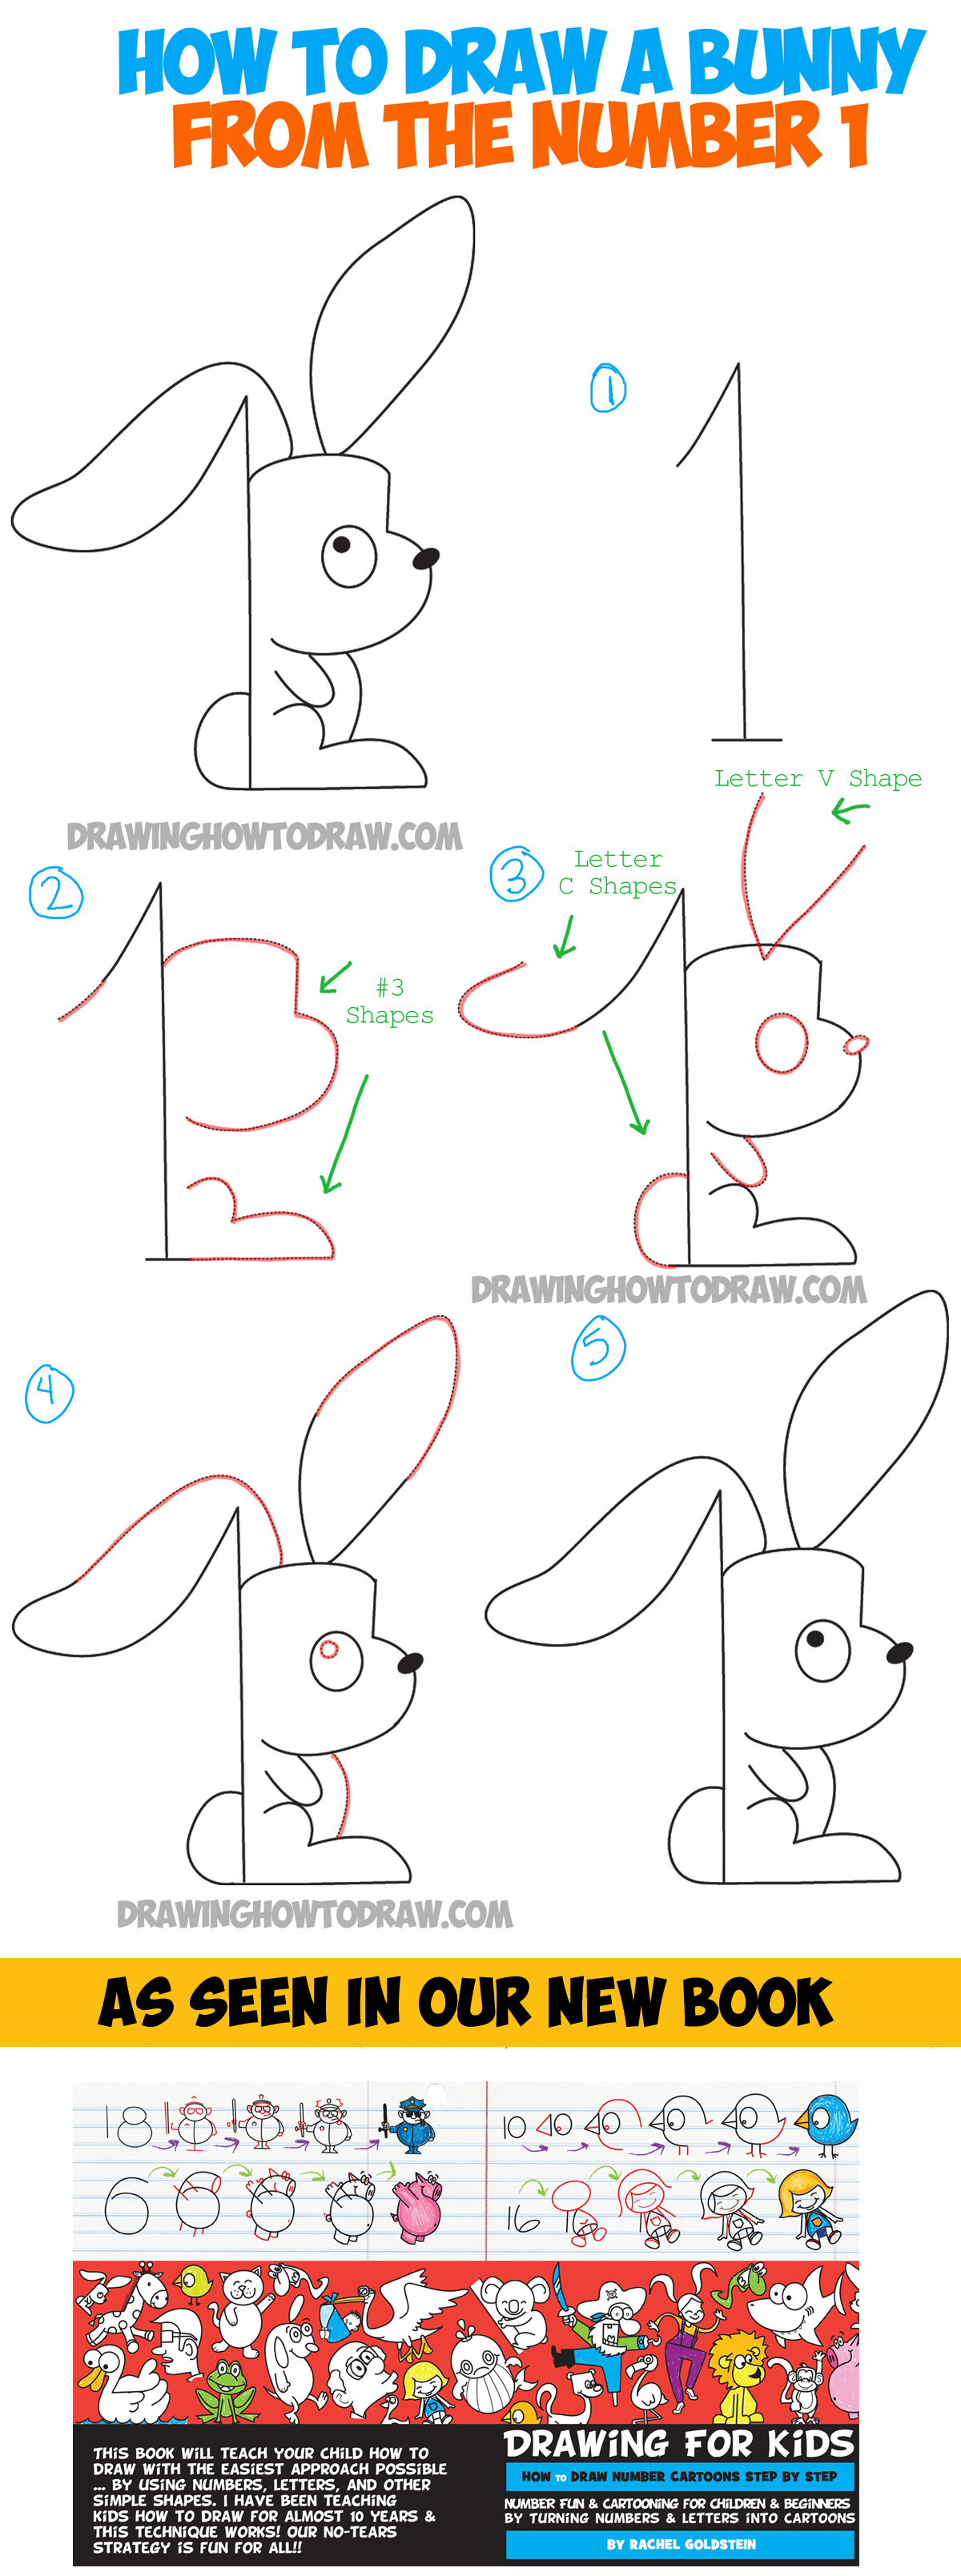 How to Draw a Cartoon Bunny Rabbit from the Number One - Drawing Tutorial for Kids